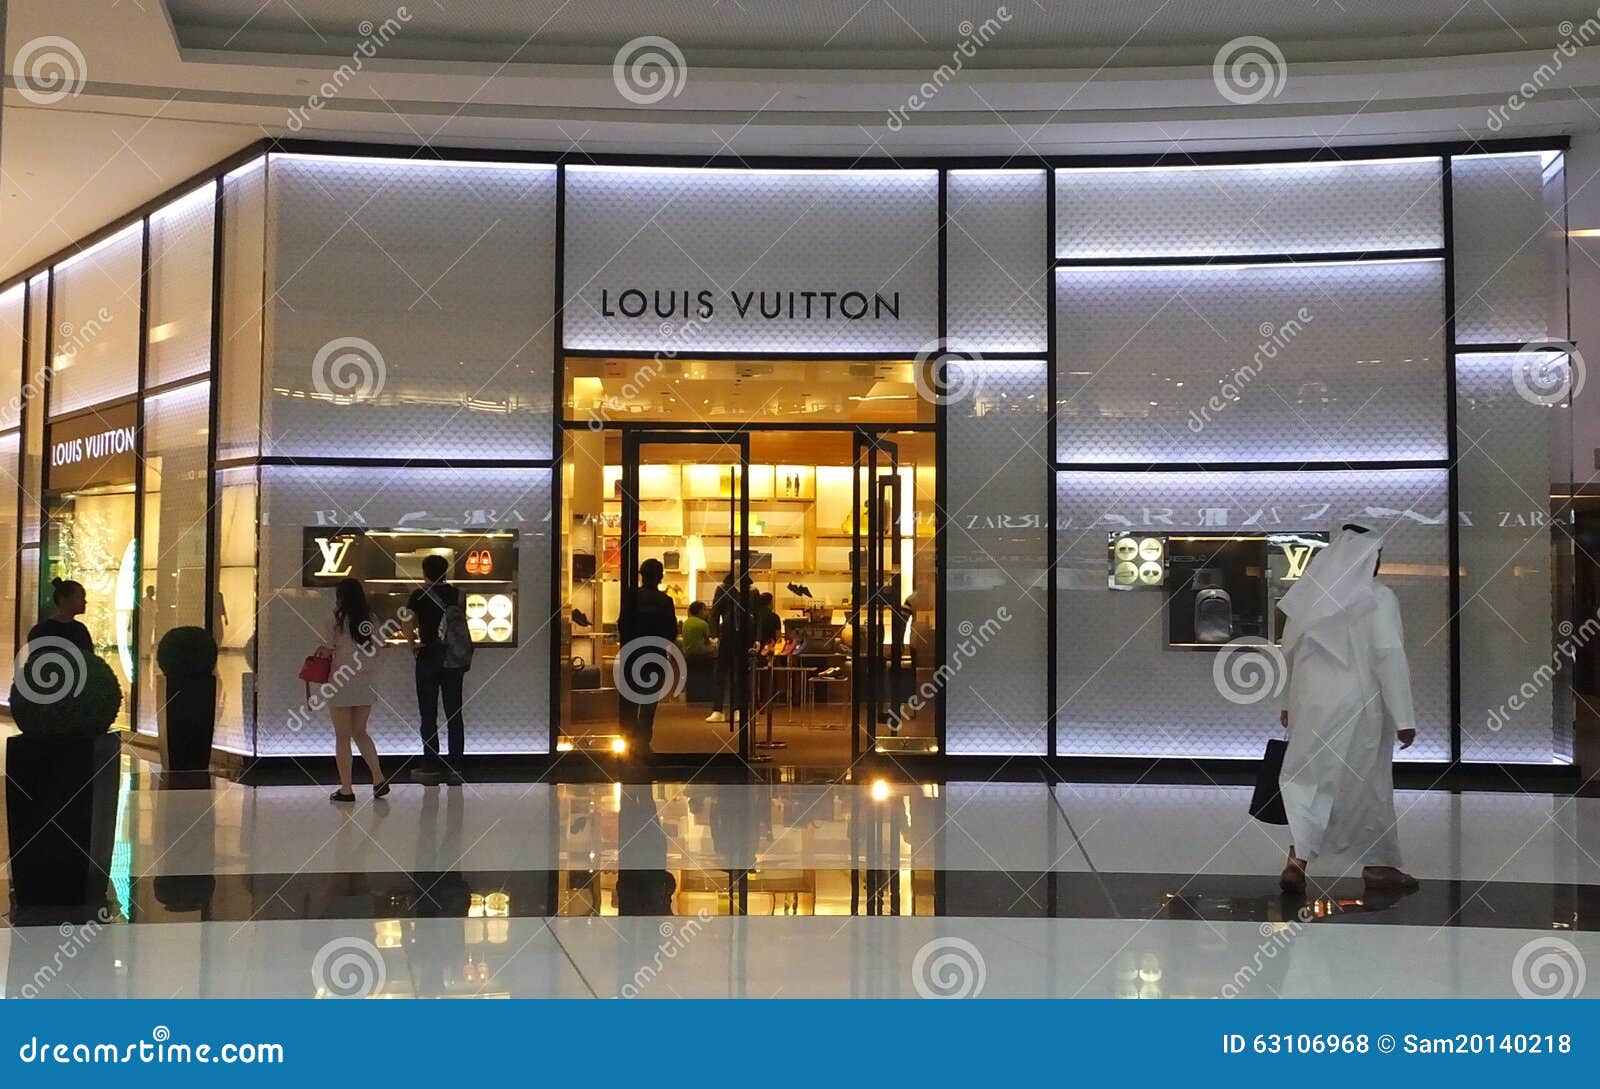 The Louis Vuitton Store In Dubai Mall Editorial Stock Photo - Image of asia, affluent: 63106968